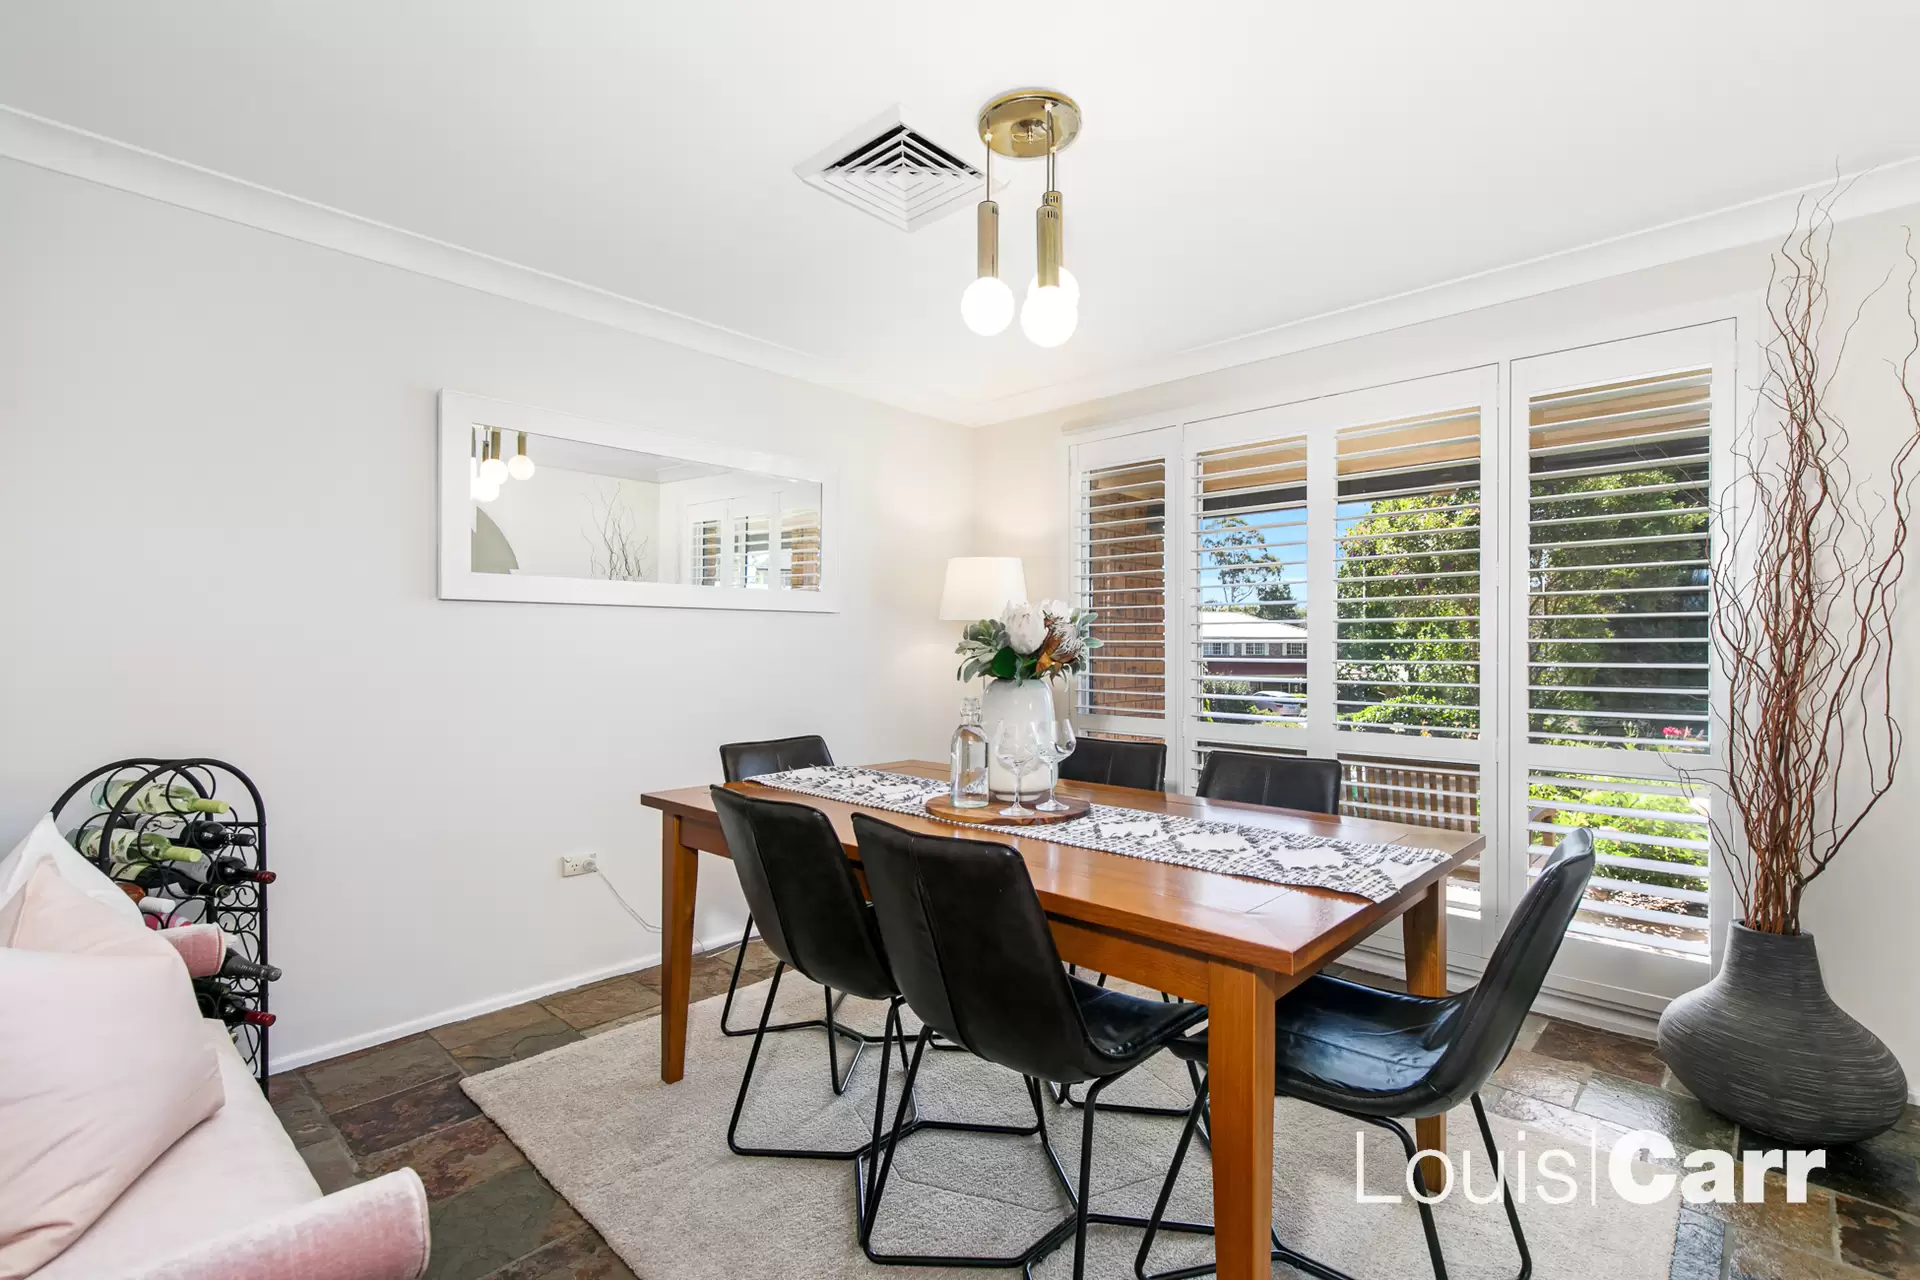 32 Carob Place, Cherrybrook Sold by Louis Carr Real Estate - image 1